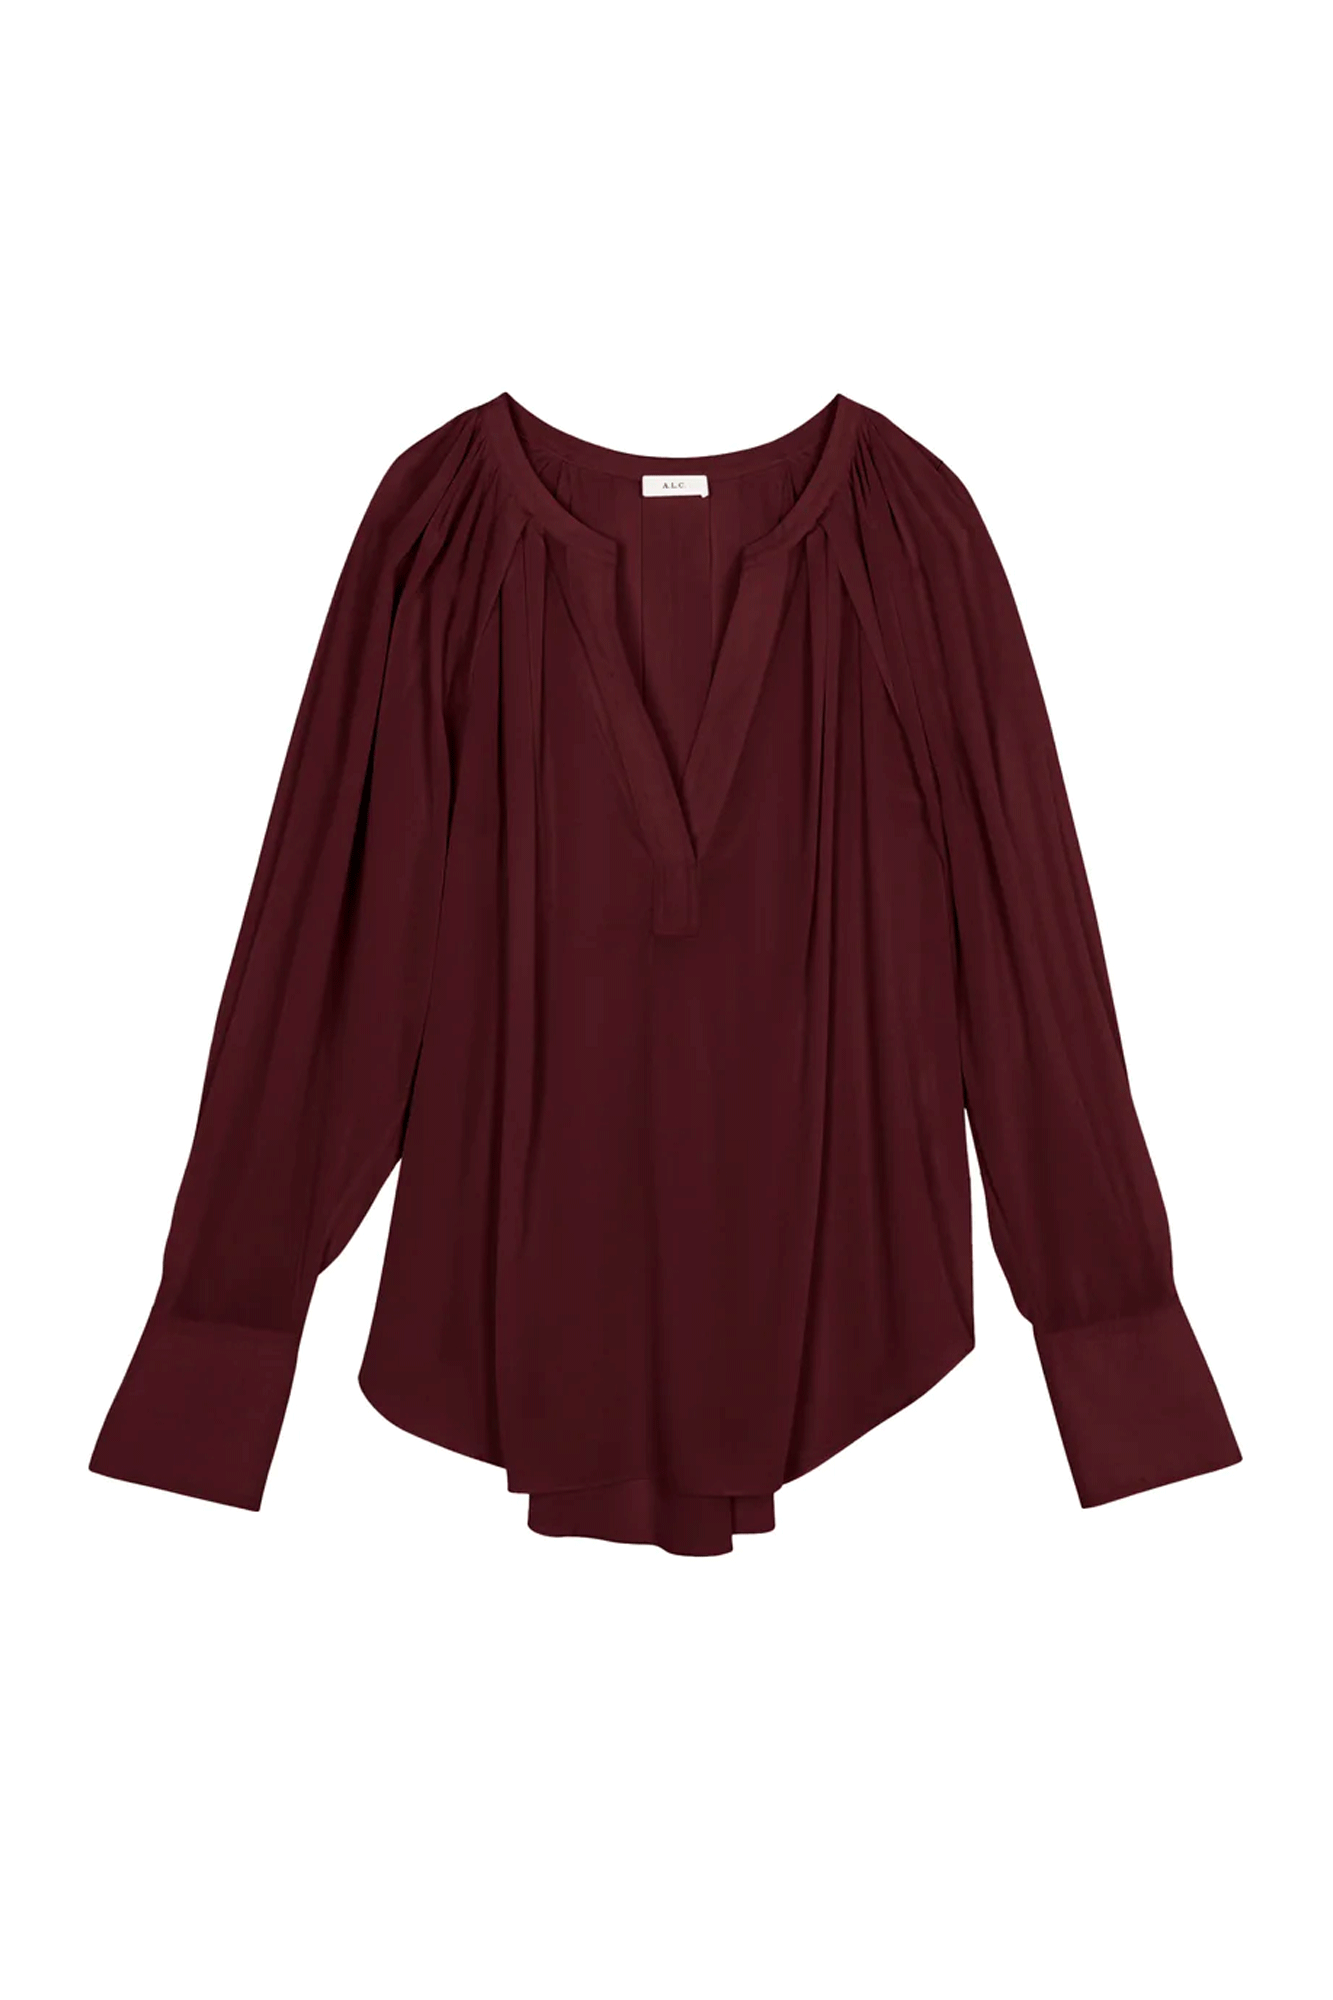 The Nomad Top from A.L.C. is an elegant statement piece crafted from a luxurious stretch silk fabric. With cuffed voluminous sleeves, a V-shaped placket neckline, and pleating at the back, this top features designer details for a timelessly polished look.